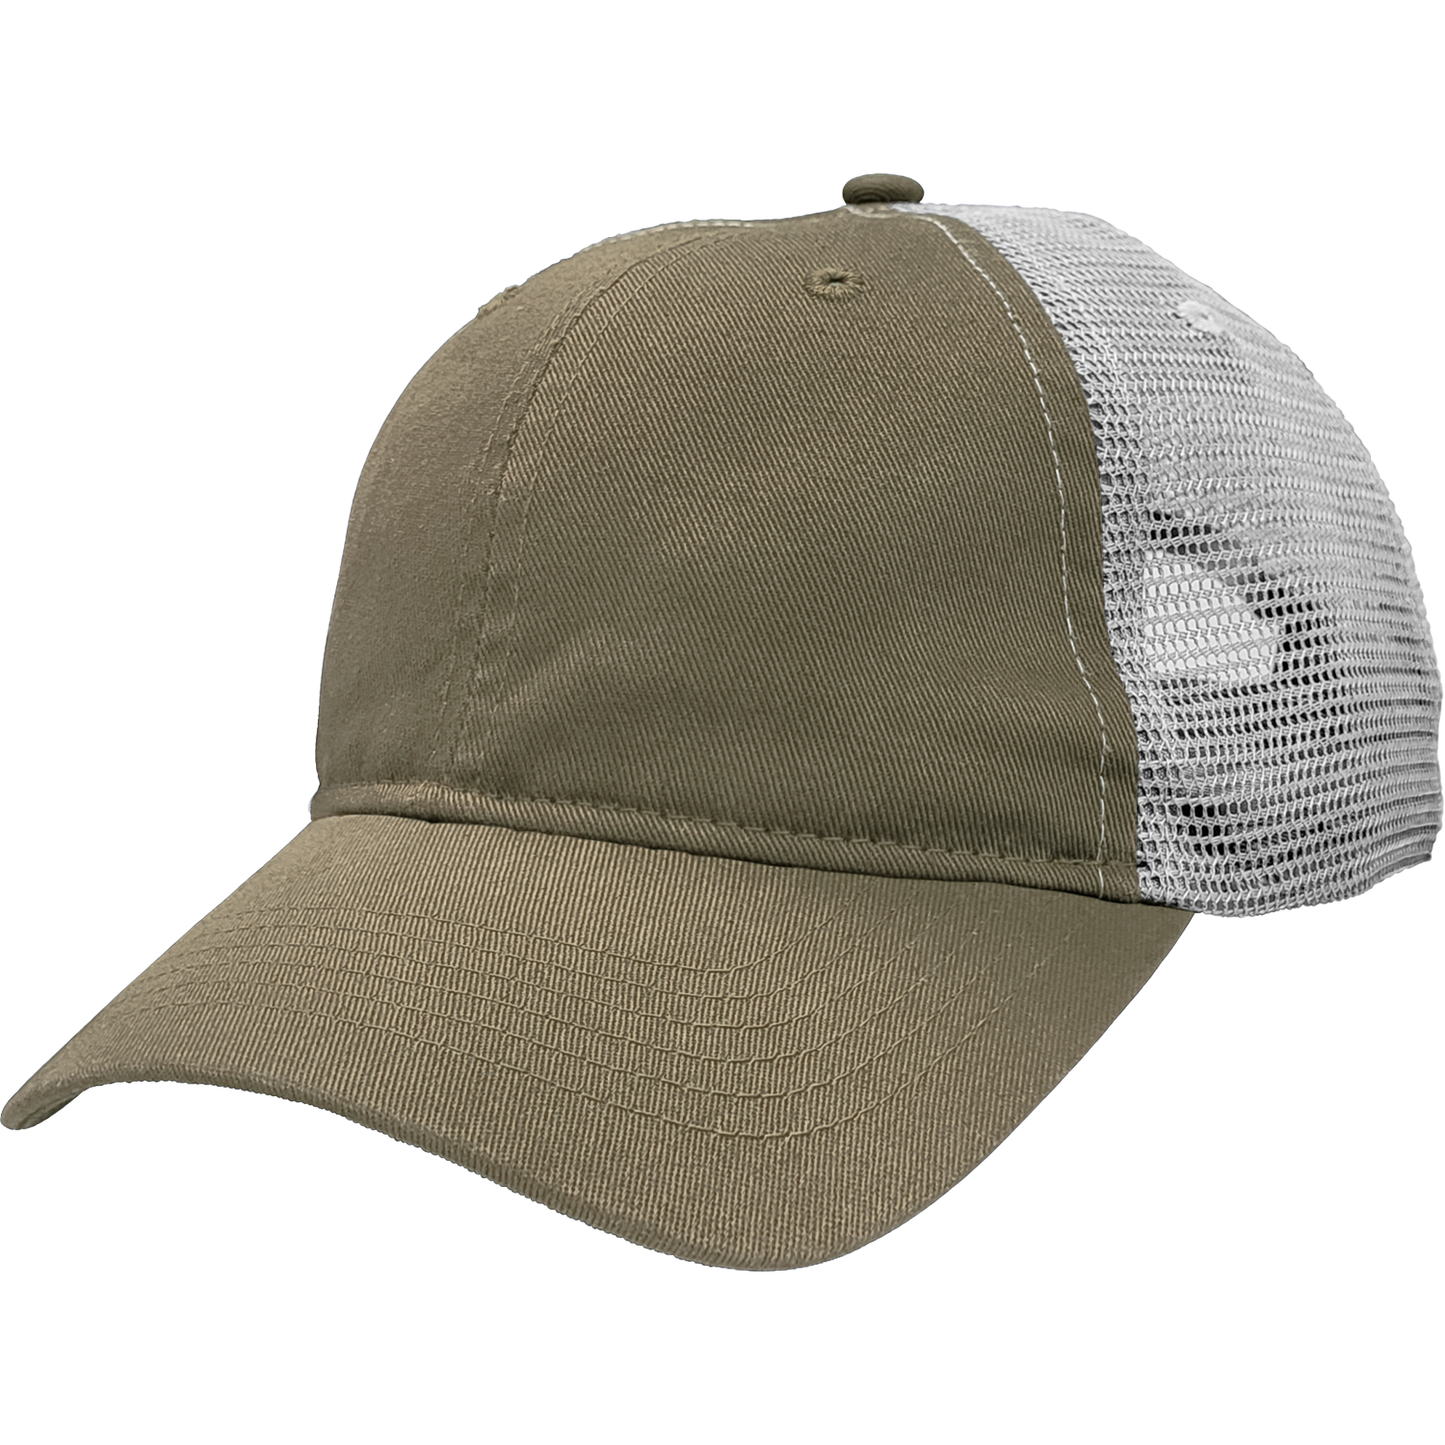 6 Panel Unstructured Mesh - WS61